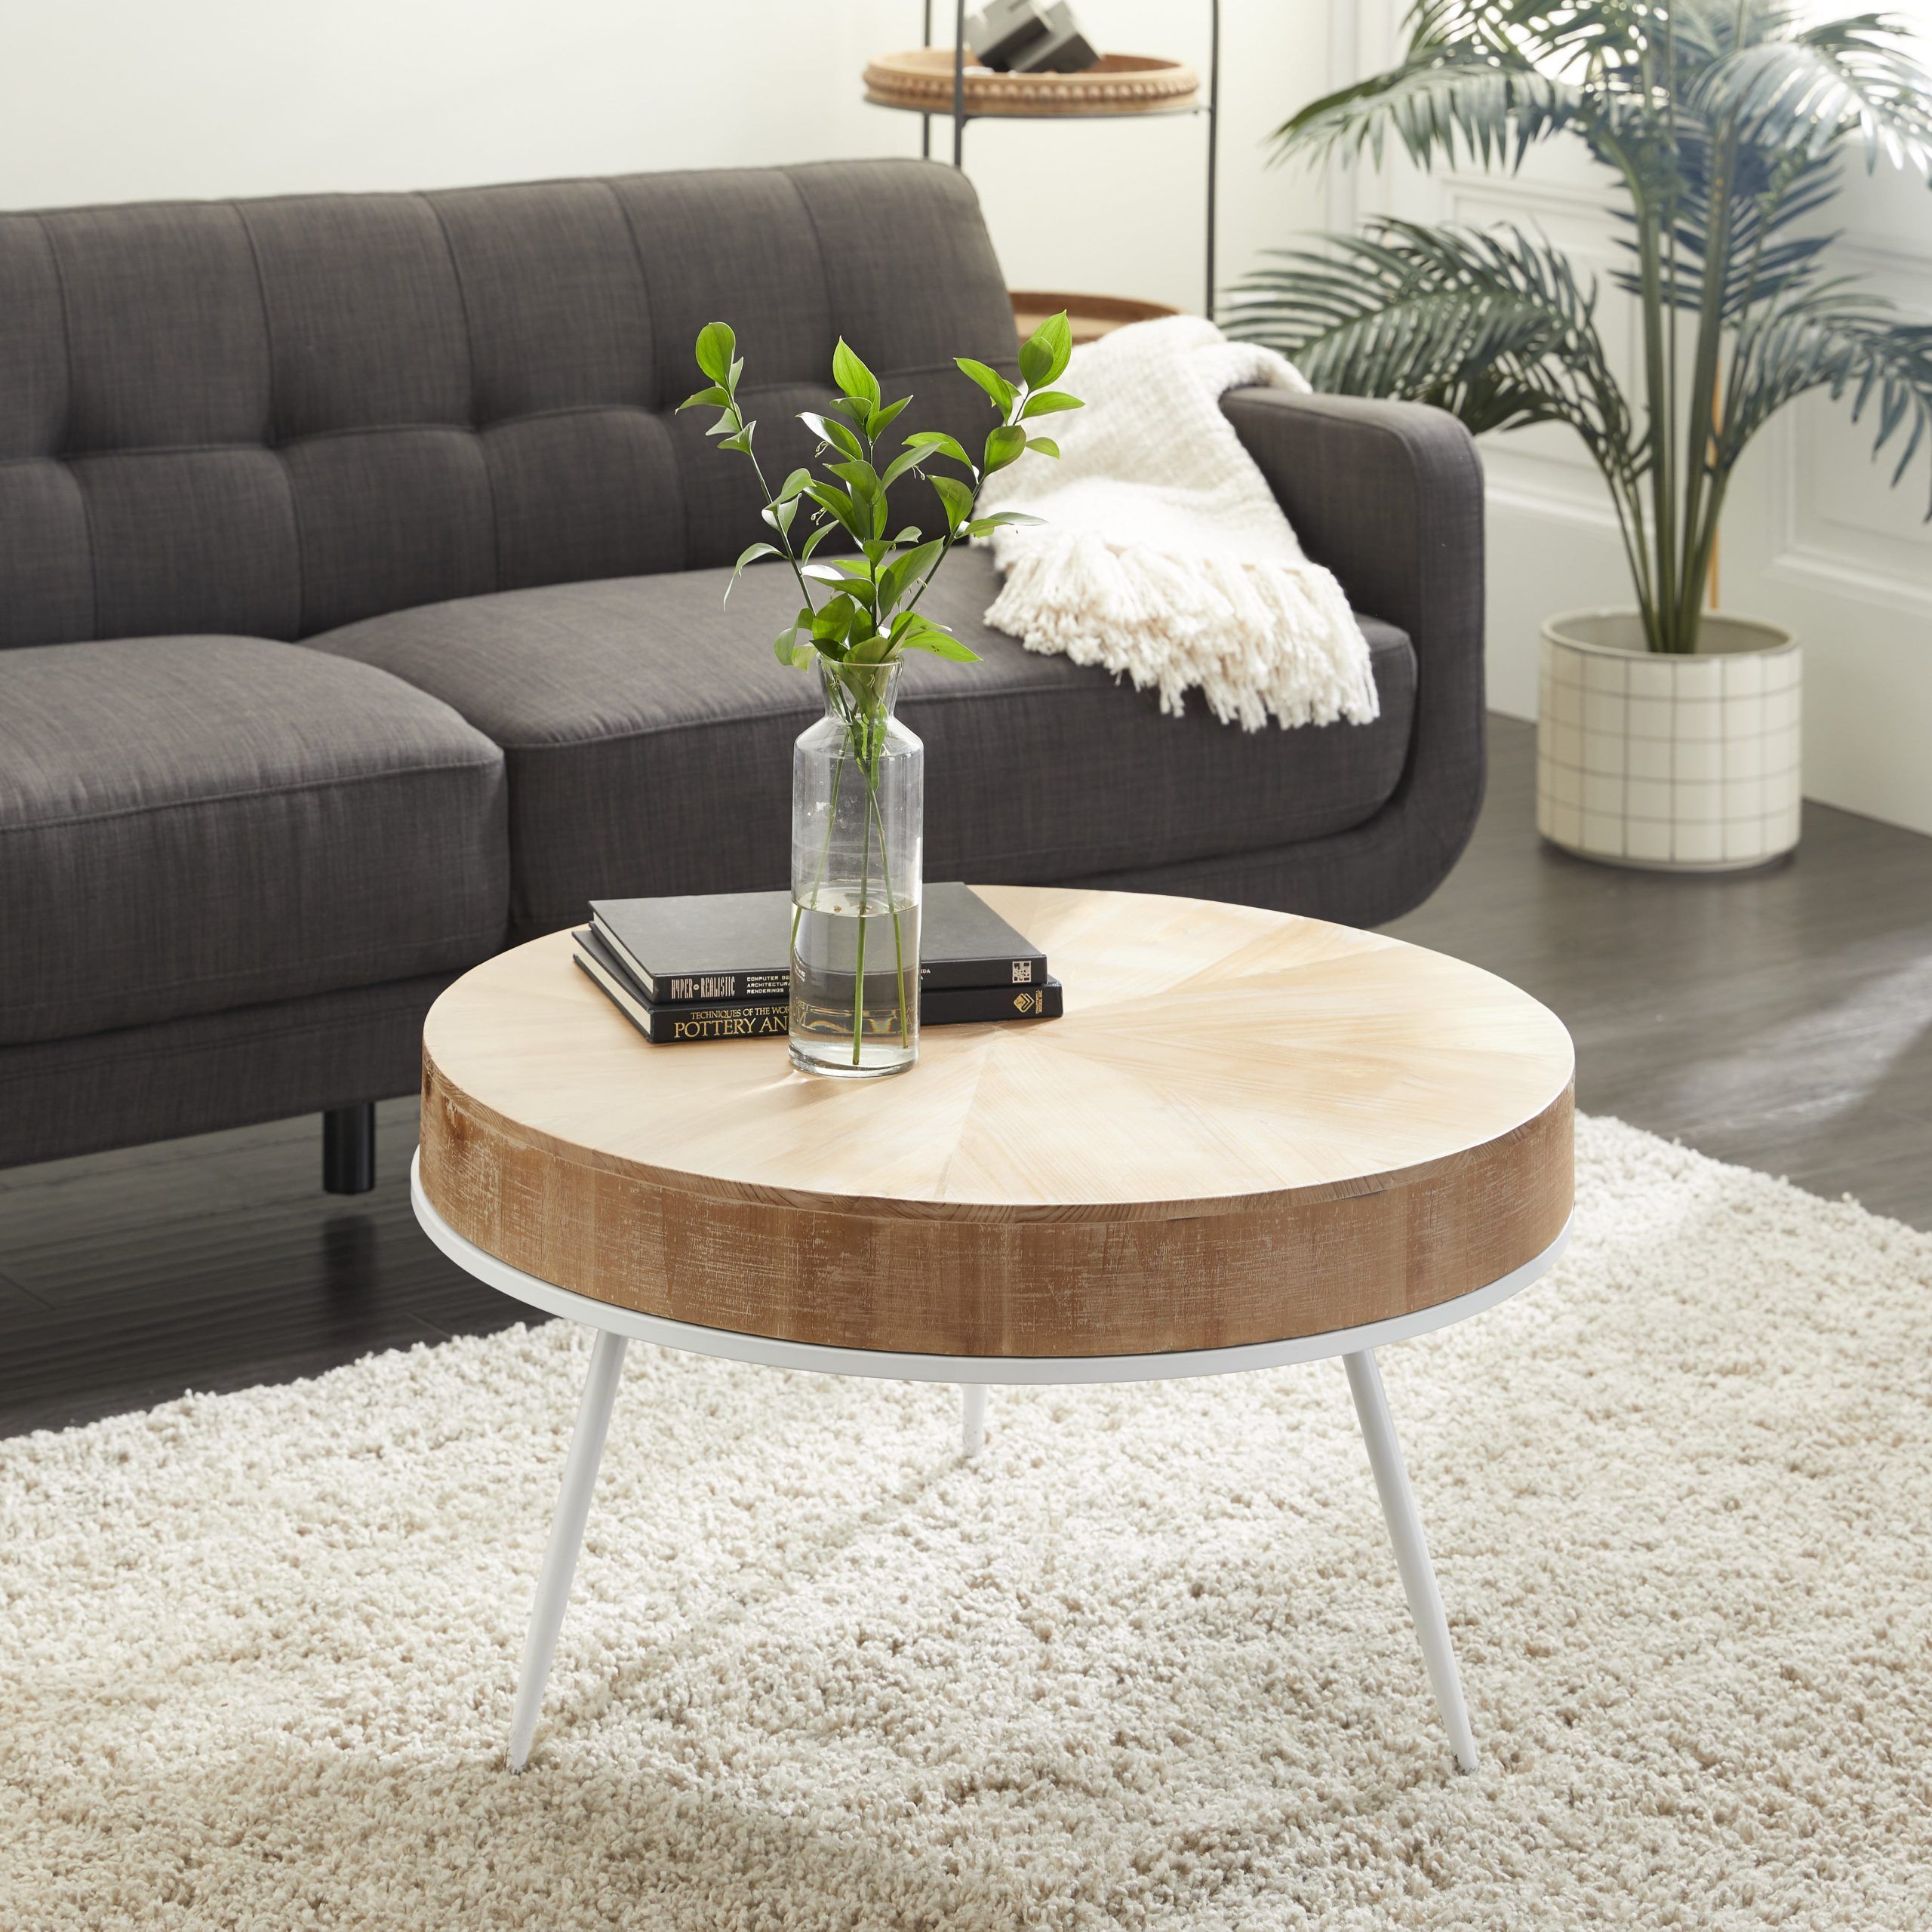 Decmode Round Natural Wood Top Coffee Table With Distressed White Metal In White T Base Seminar Coffee Tables (View 6 of 20)